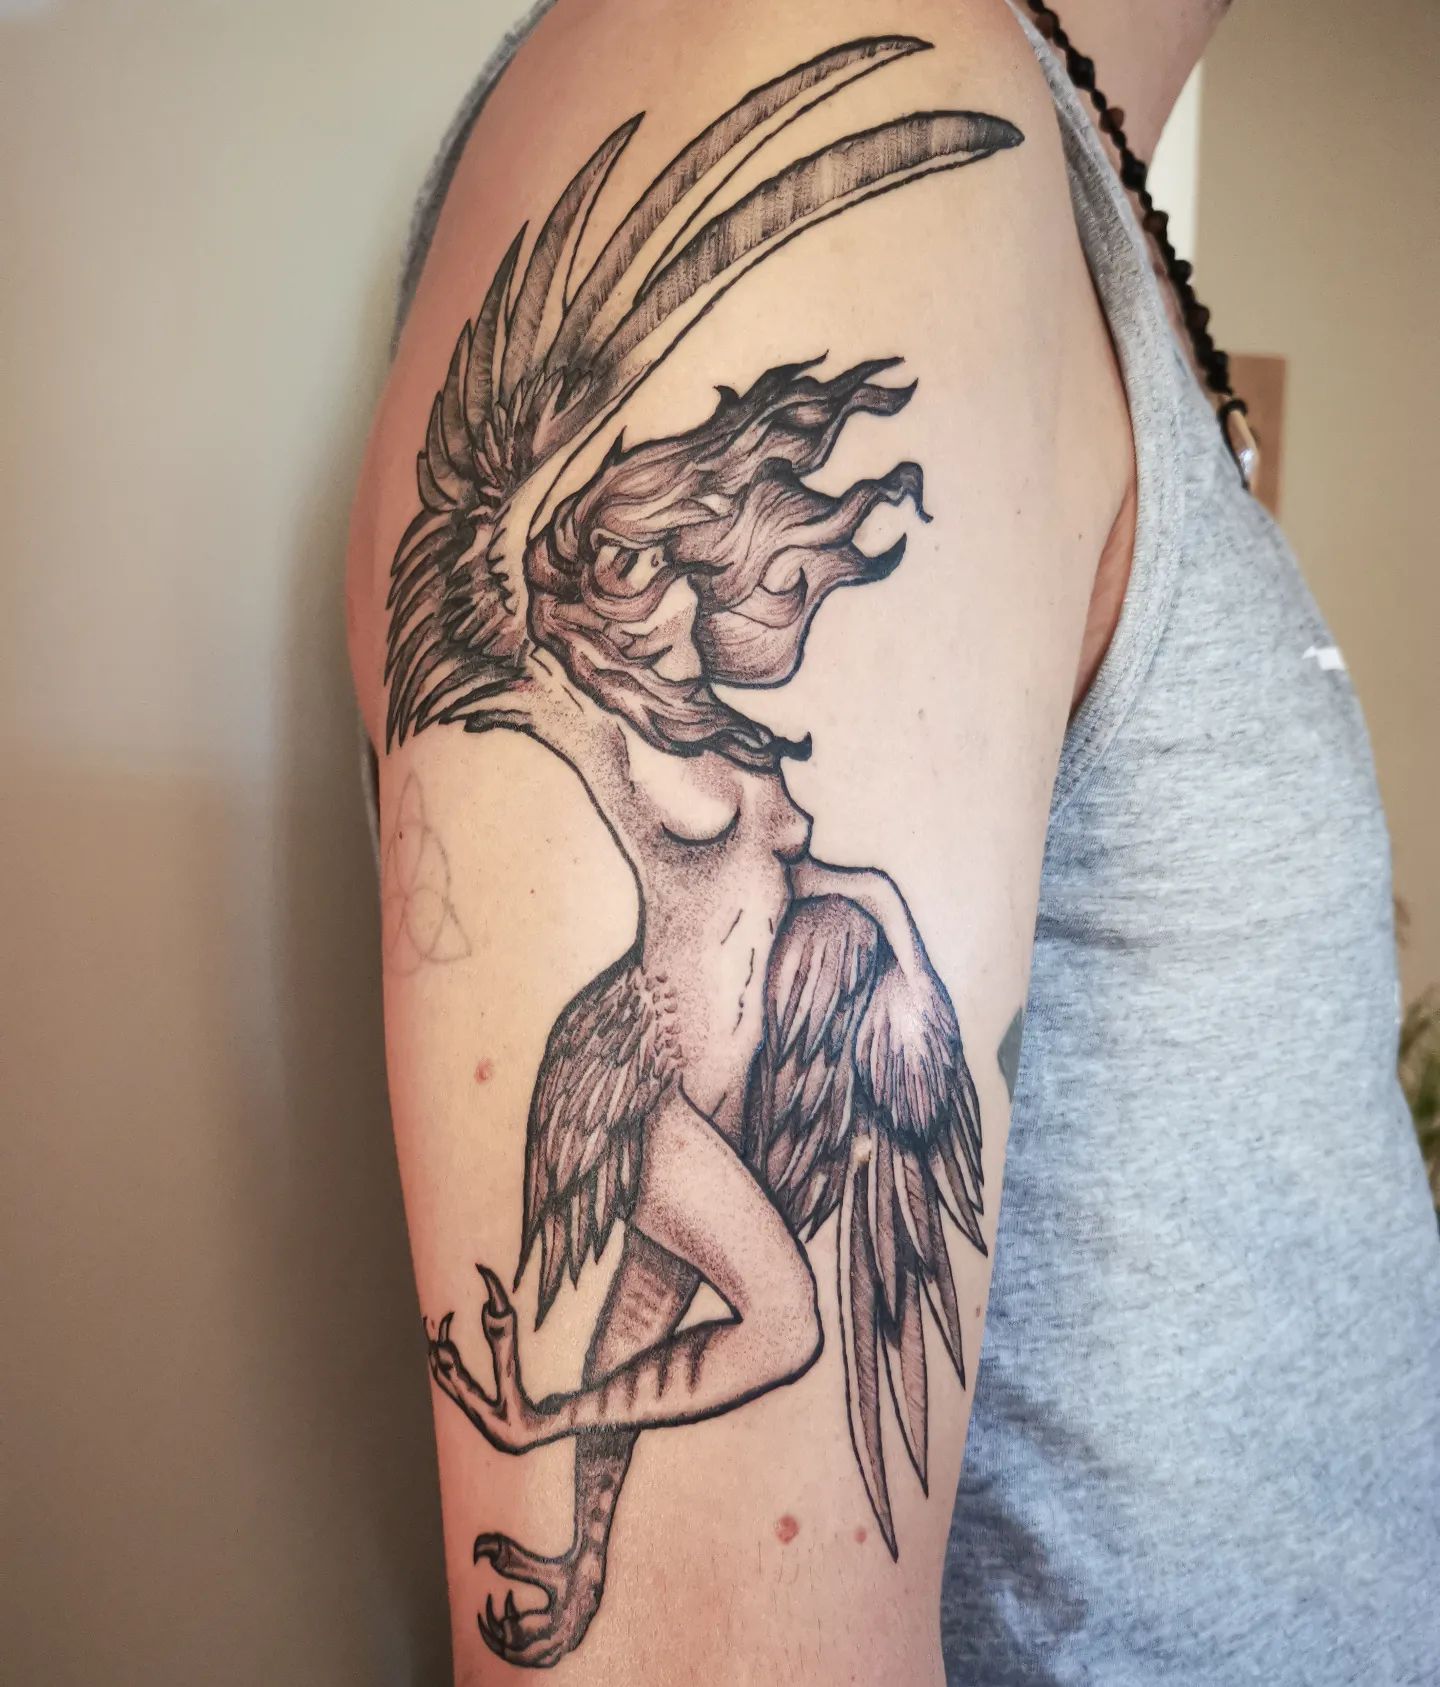 This mythological creature is both scary and fabulous to look at. Let's get a tattoo of Harpy.